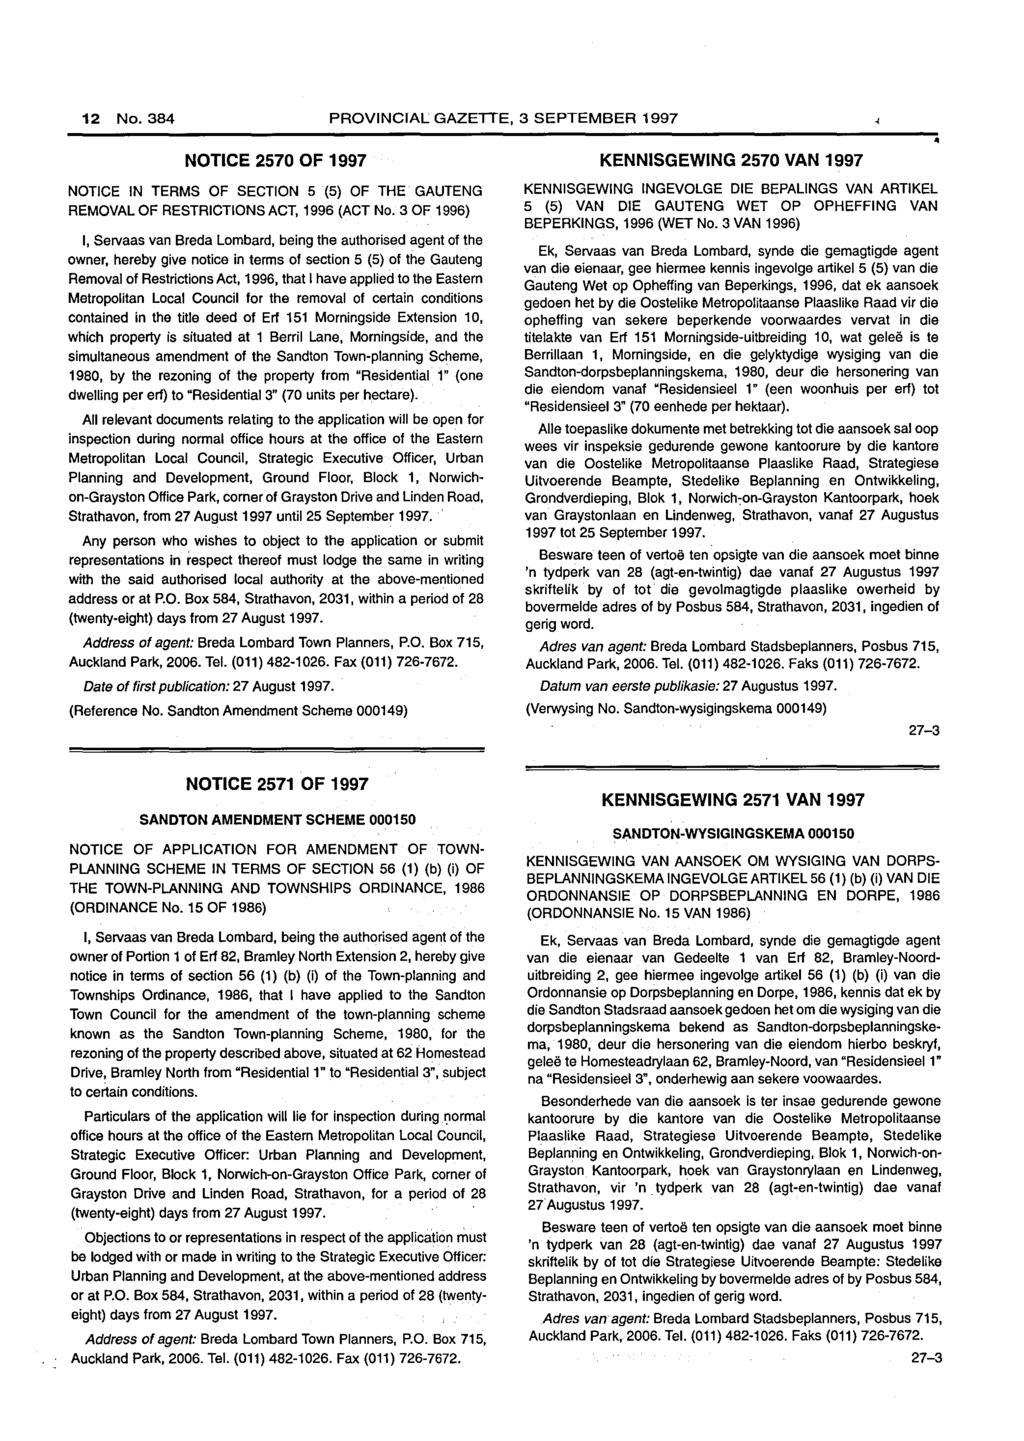 12 No. PROVINCIAL GAZETTE, 3 SEPTEMBER 1997 NOTICE 2570 OF 1997 NOTICE IN TERMS OF SECTION 5 (5) OF THE GAUTENG REMOVAL OF RESTRICTIONS ACT, 1996 (ACT No.